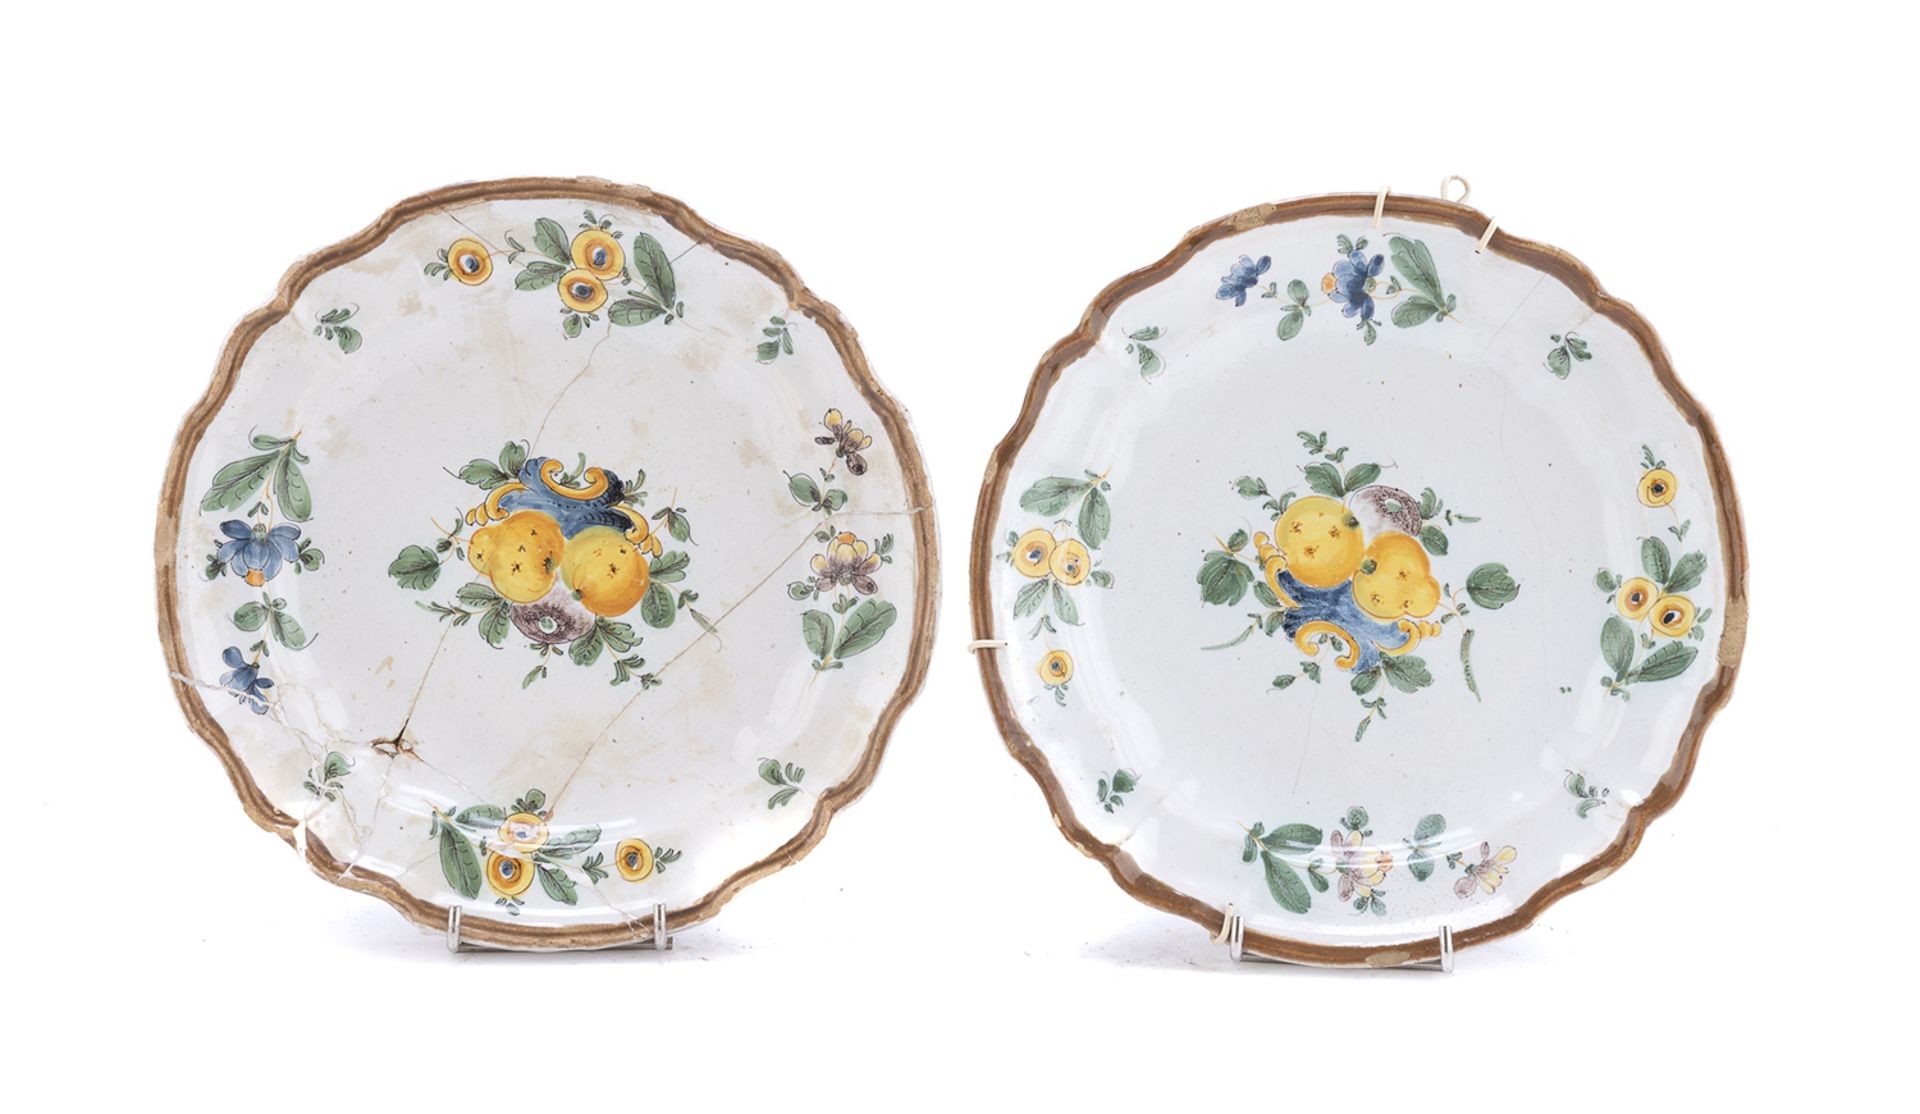 PAIR OF MAJOLICA PLATES NORTHERN ITALY 18th CENTURY